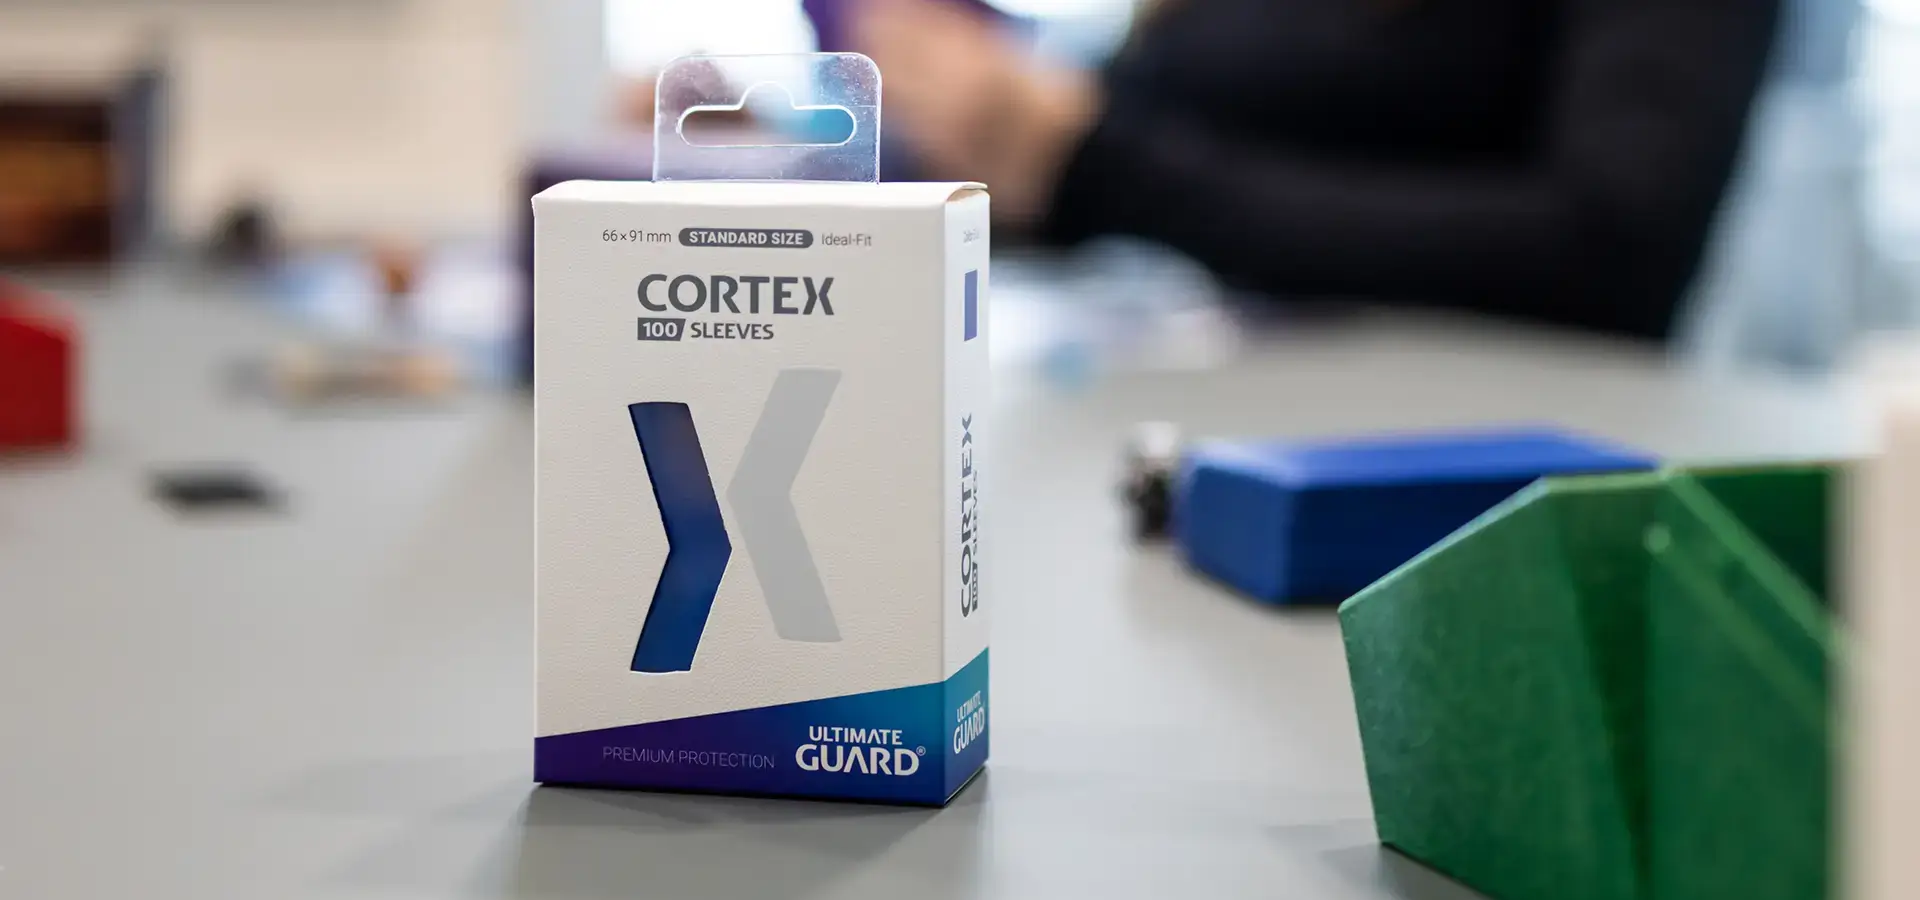 Ultimate Guard on X: We mark the beginning of the new year with launching  Cortex glossy sleeves. Designed for daily use, Cortex features perfect  shuffle, high opacity, and strong seal strength. Get